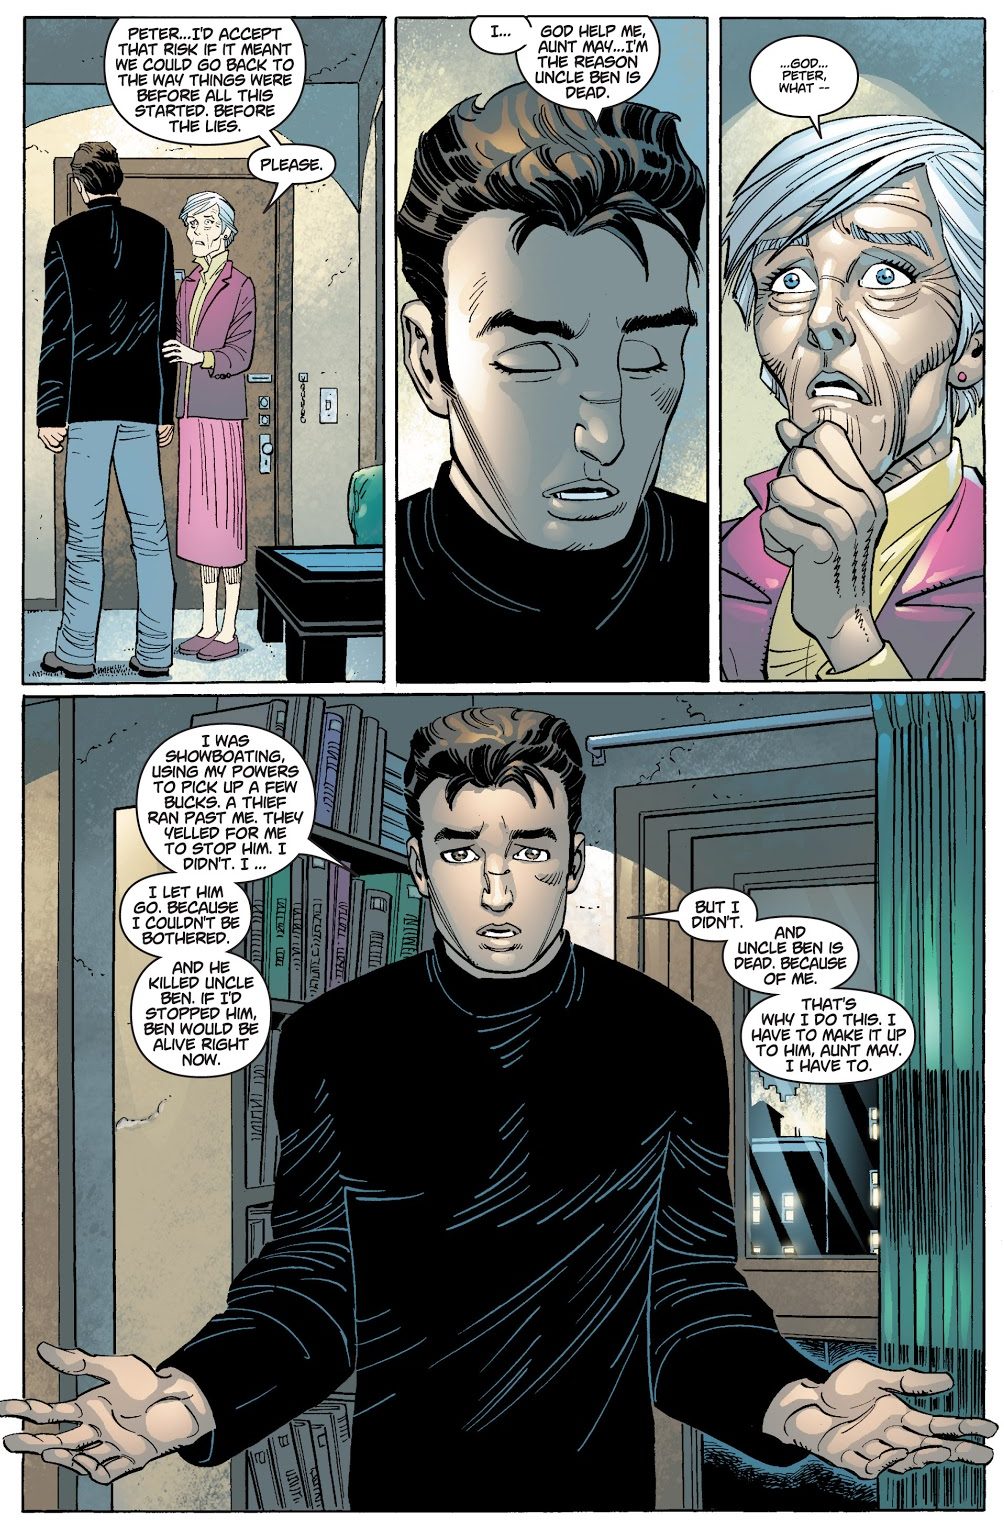 From – The Amazing Spider-Man Vol. 2 #38